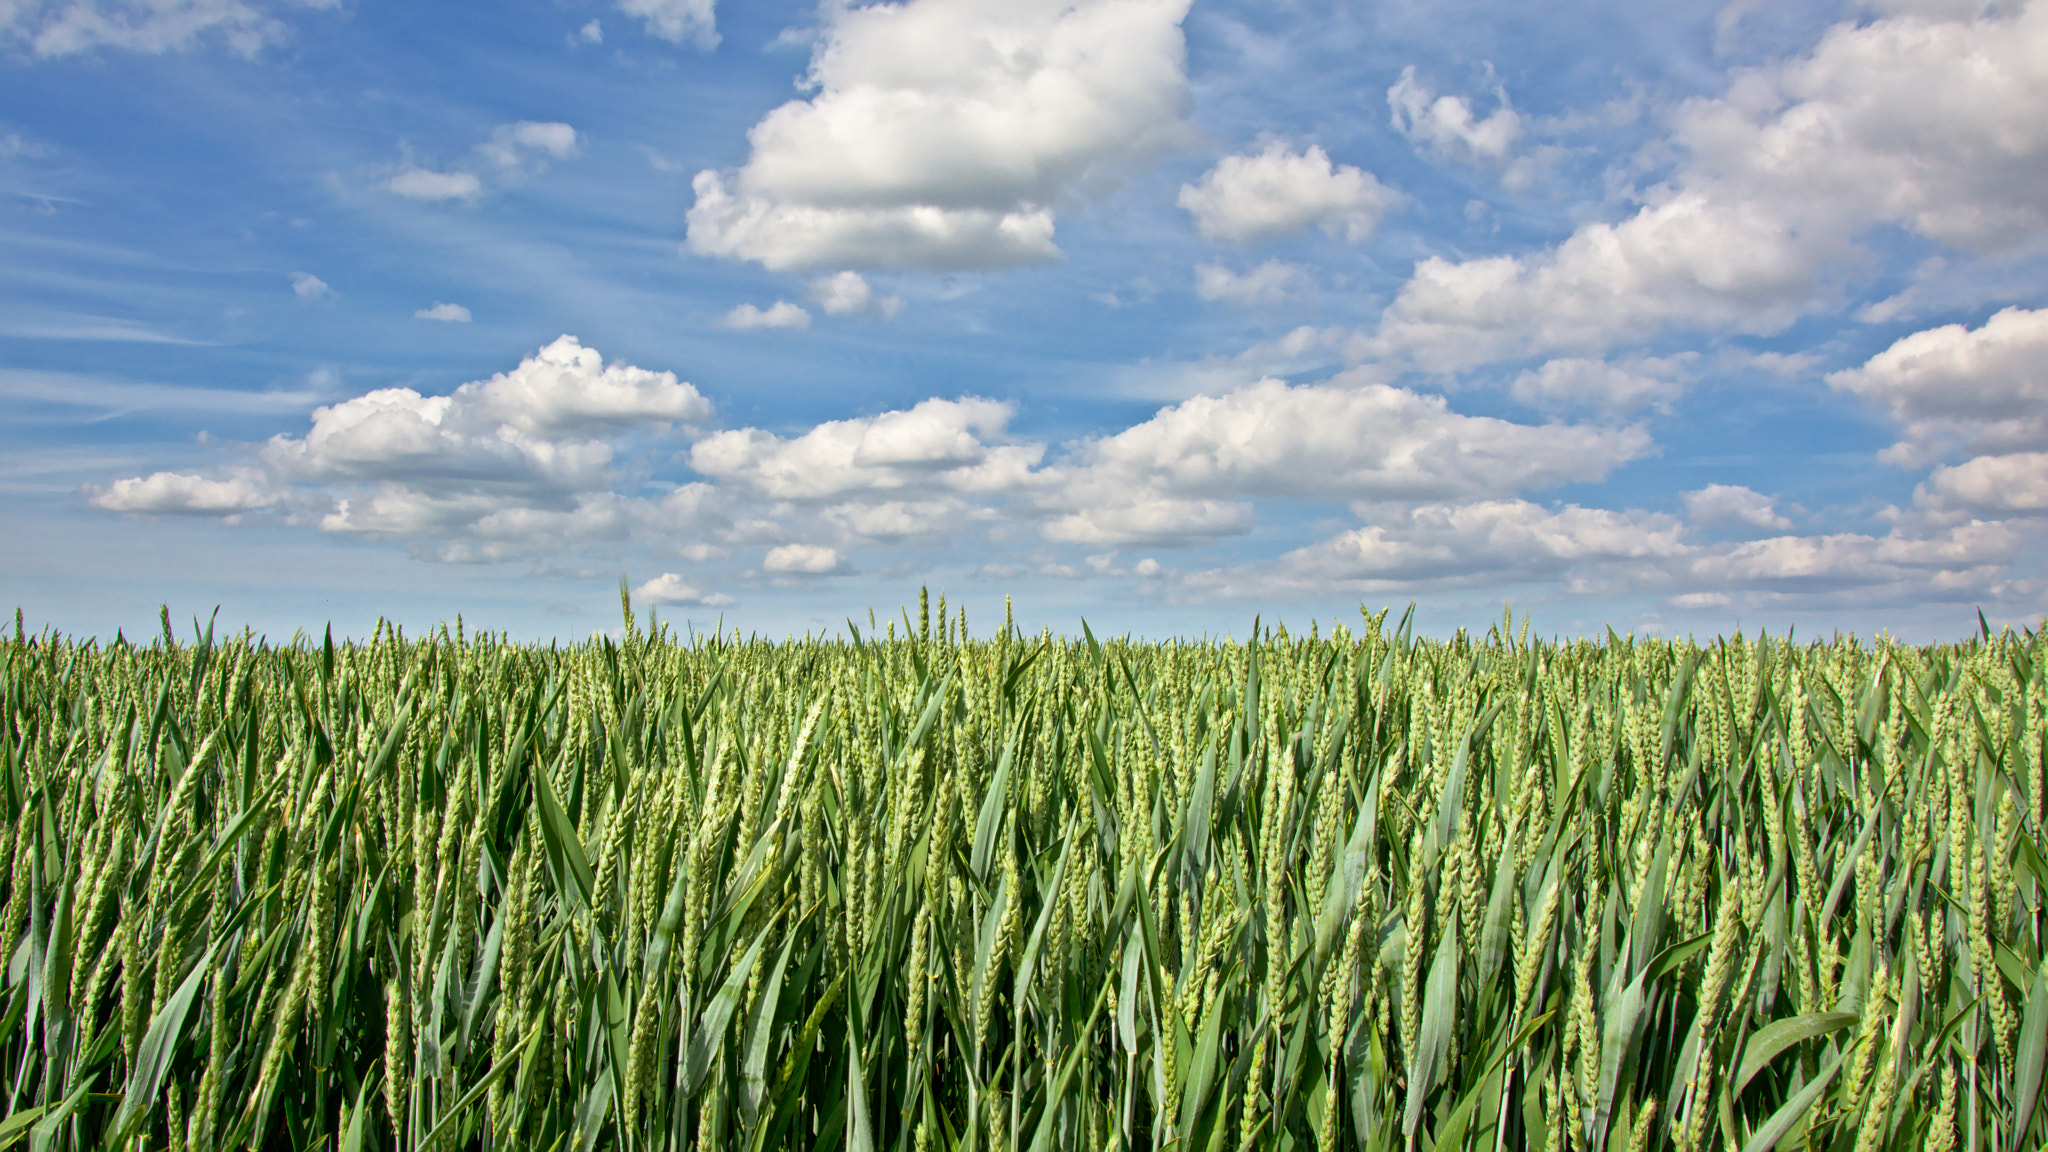 Nikon D5200 sample photo. Young green wheat field on a blue sky with fluffy photography